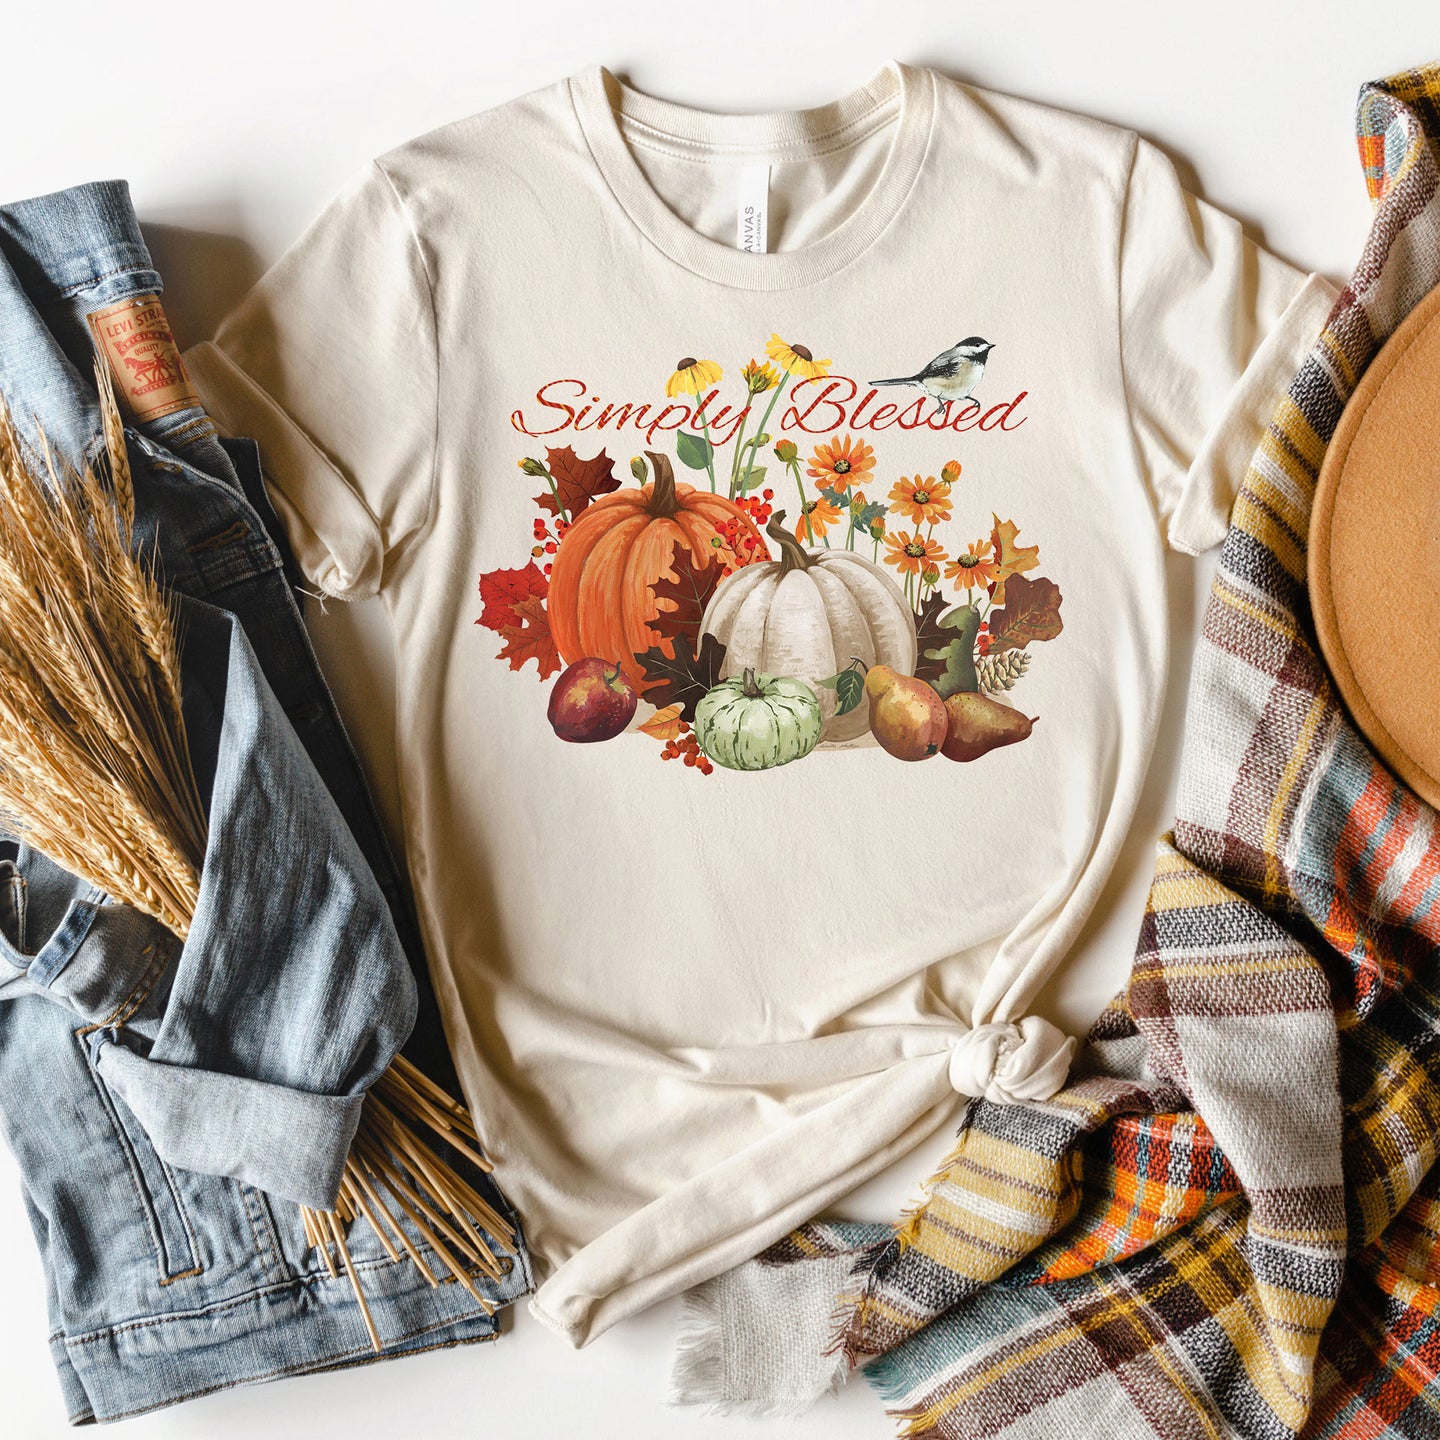 Simply Blessed T-shirt, Autumn Tee